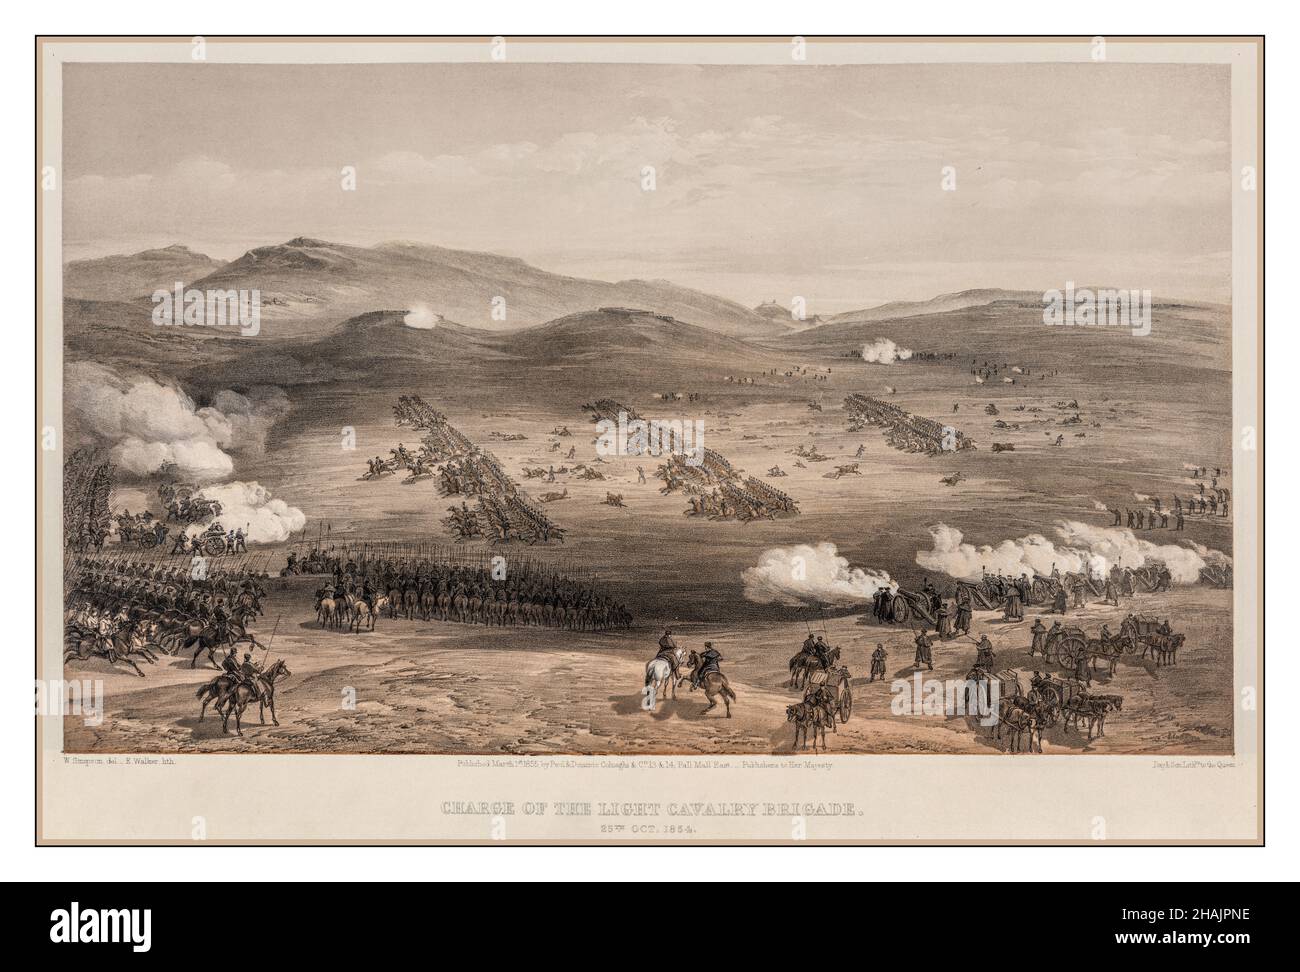 Vintage archive illustration Charge of the light cavalry brigade, 25th Oct. 1854, under Major General the Earl of Cardigan / W. Simpson delt. ; E. Walker lith Lord Cardigan leading the charge of the light brigade toward Russian artillery on the left, in the foreground, Russian artillery fire on the left flank of the charging light brigade, as artillery on the hills in the background fire on the right flank; Russian cavalry wait in readiness to engage the British or to counterattack. Day & Son. Simpson, William, 1823-1899, artist Stock Photo